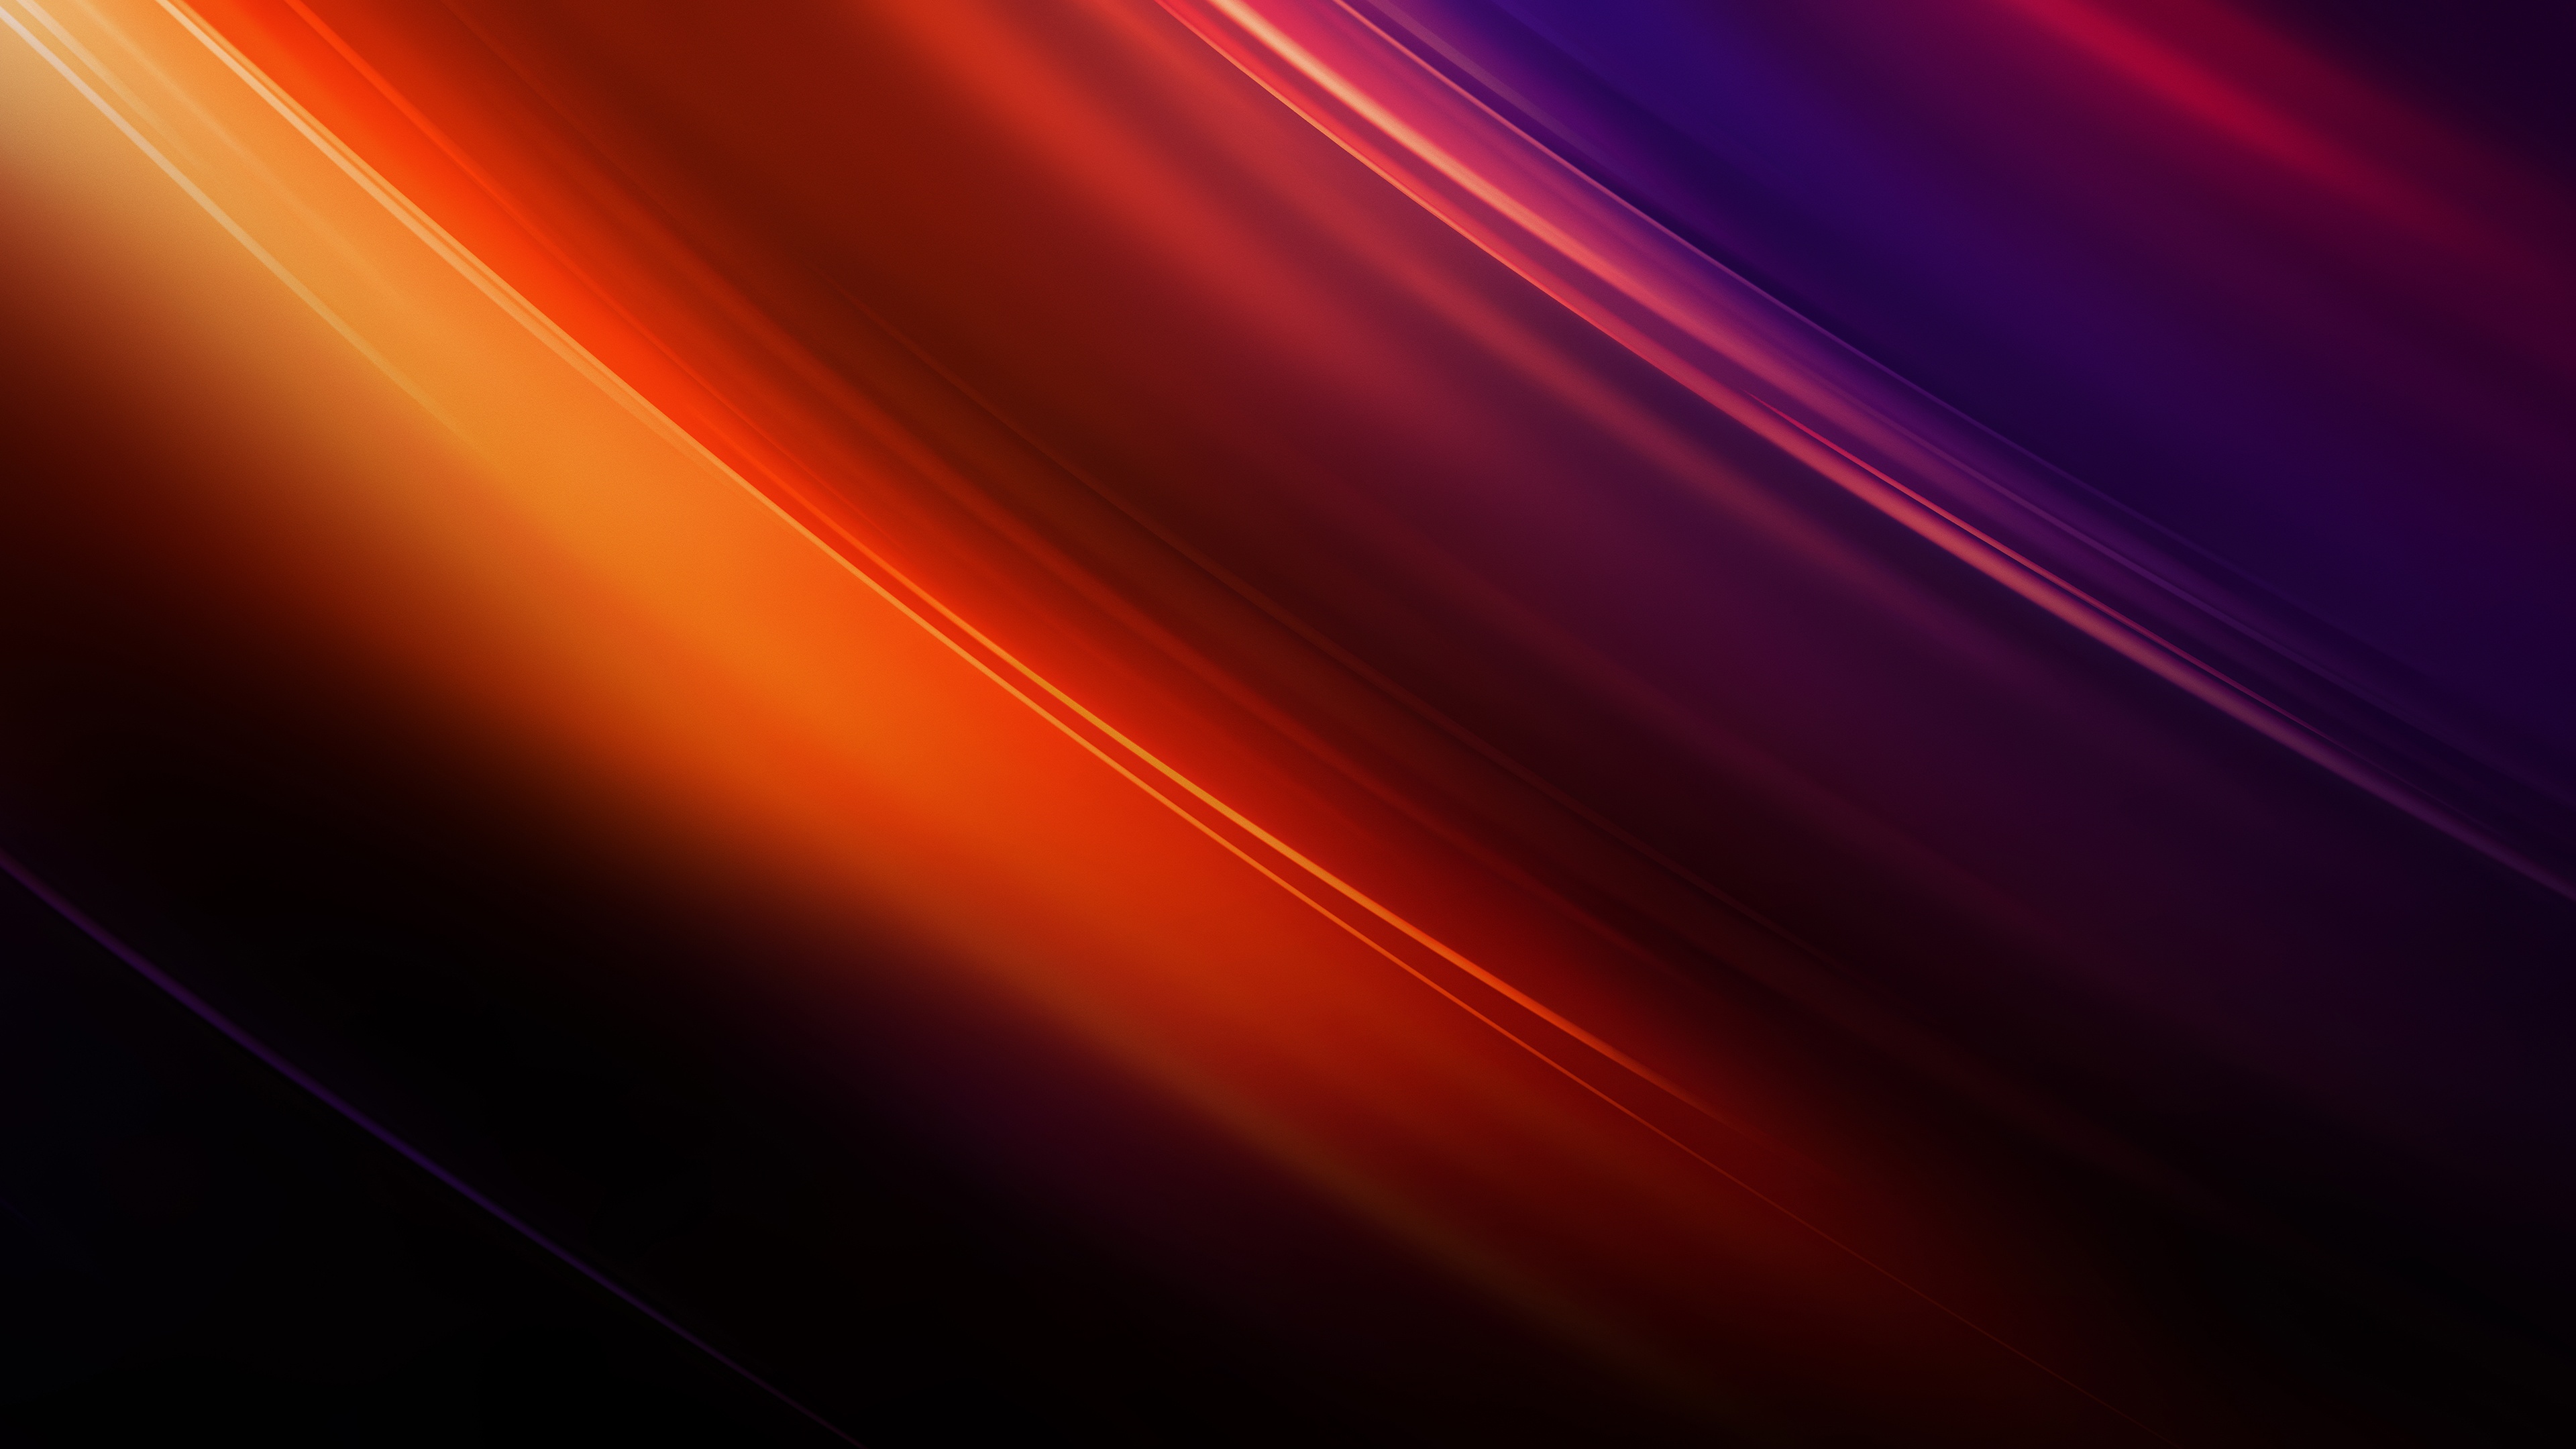 OnePlus 8 Pro Wallpaper 4K, Stock, 2020, Abstract, #512